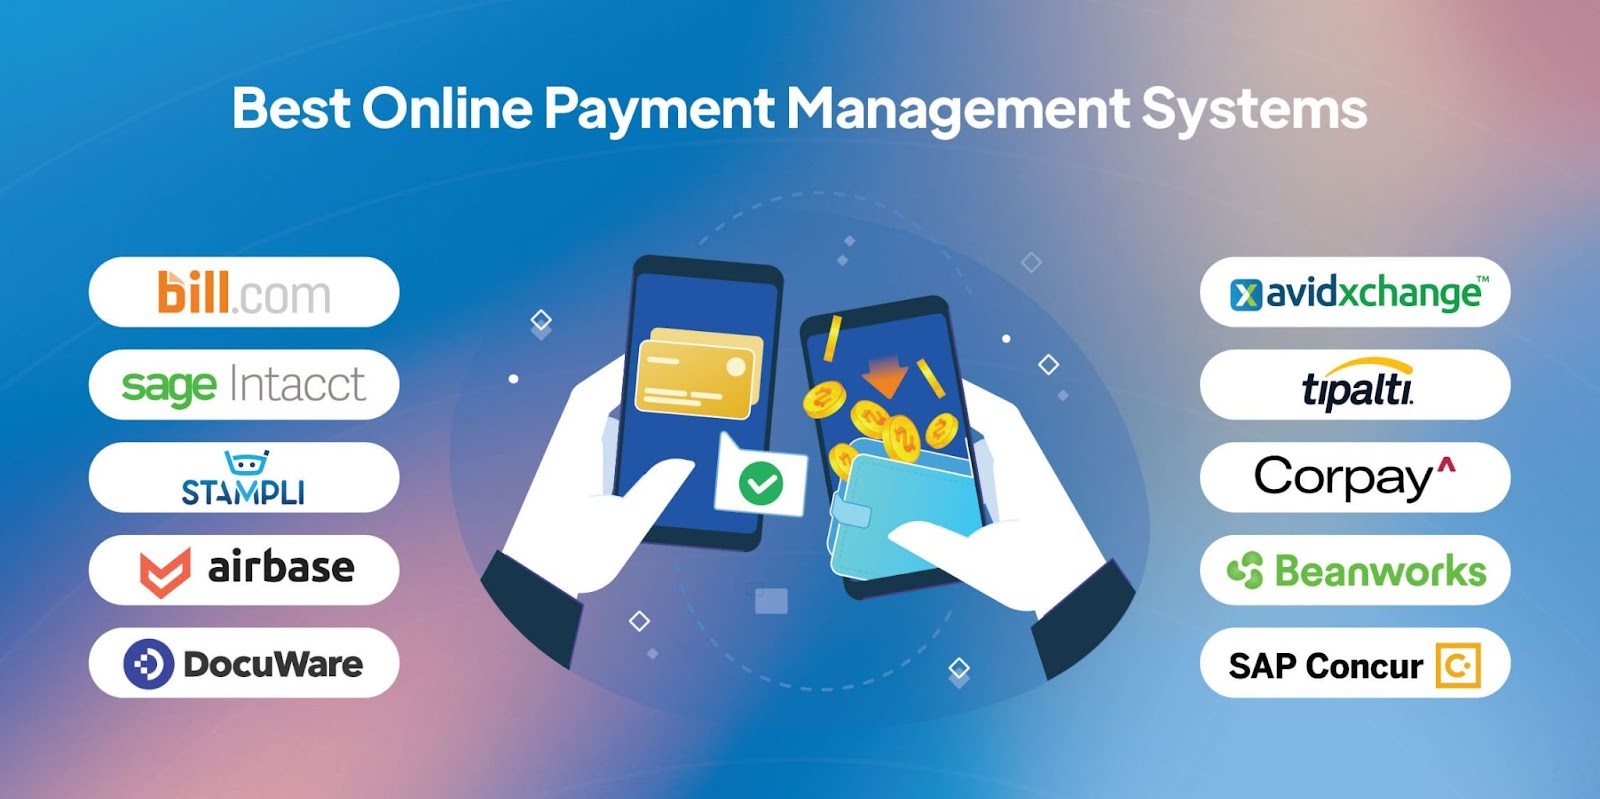 Online Payment Management Systems